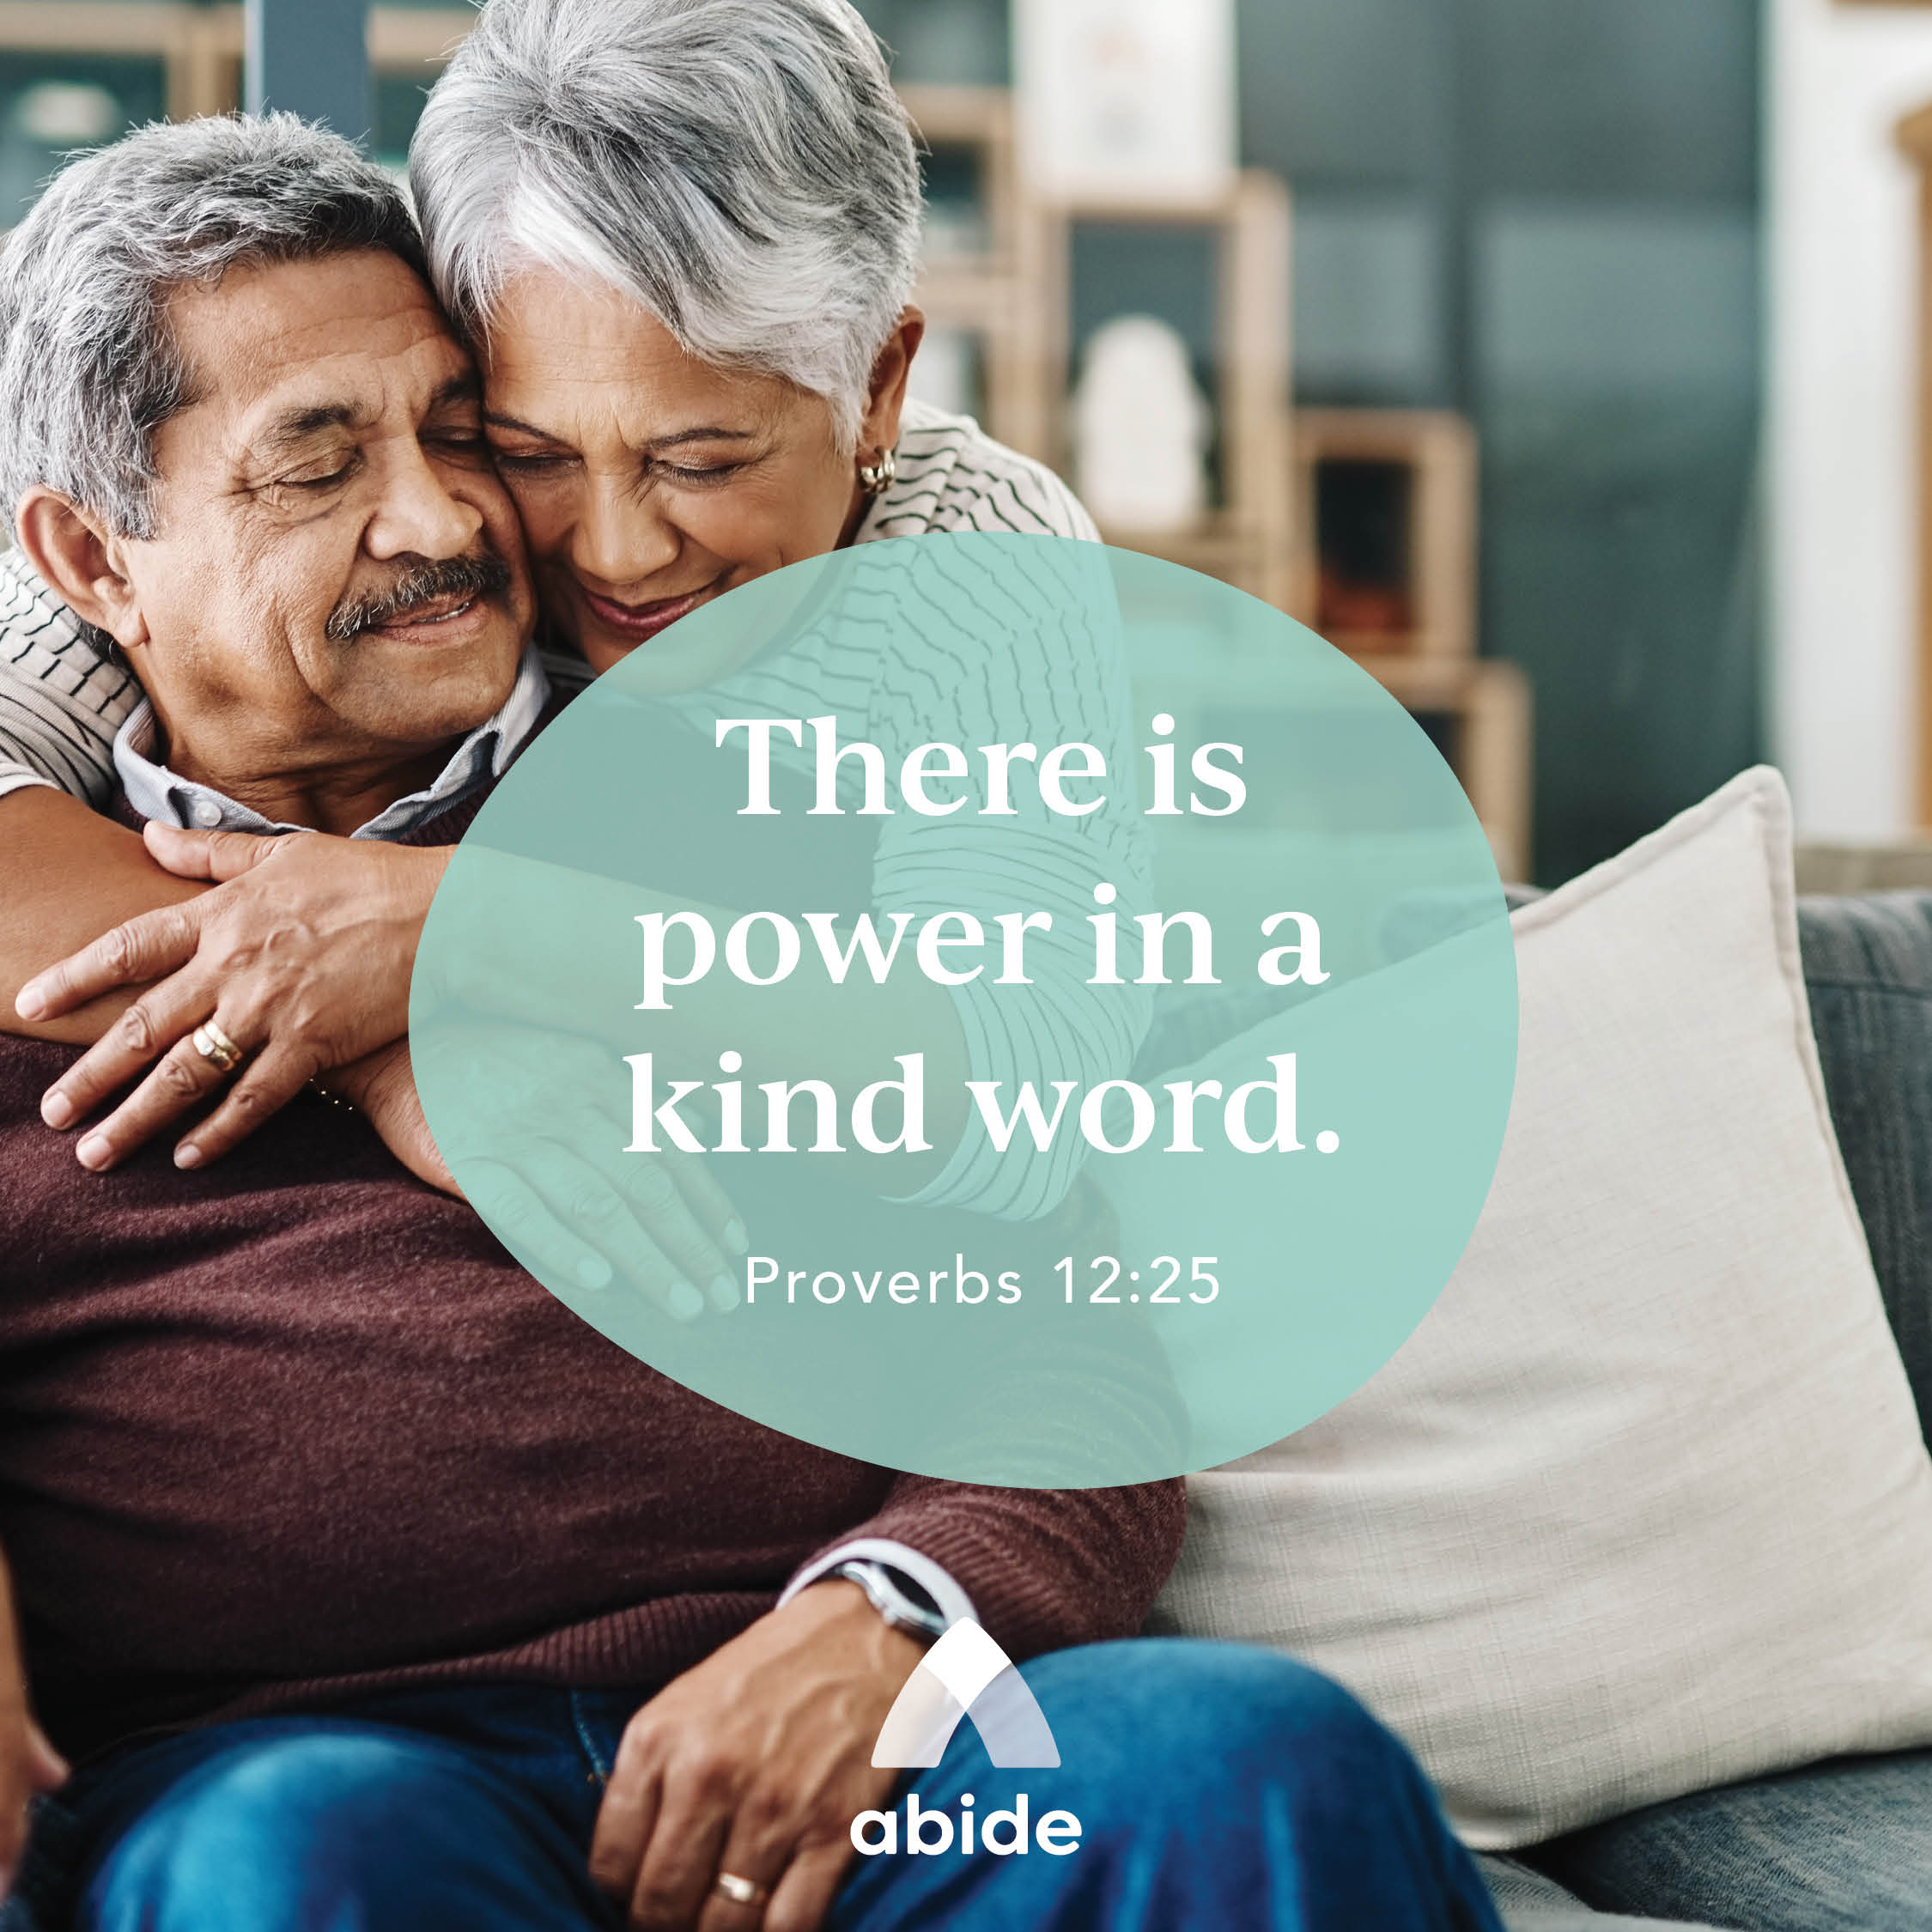 The Power of a Kind Word